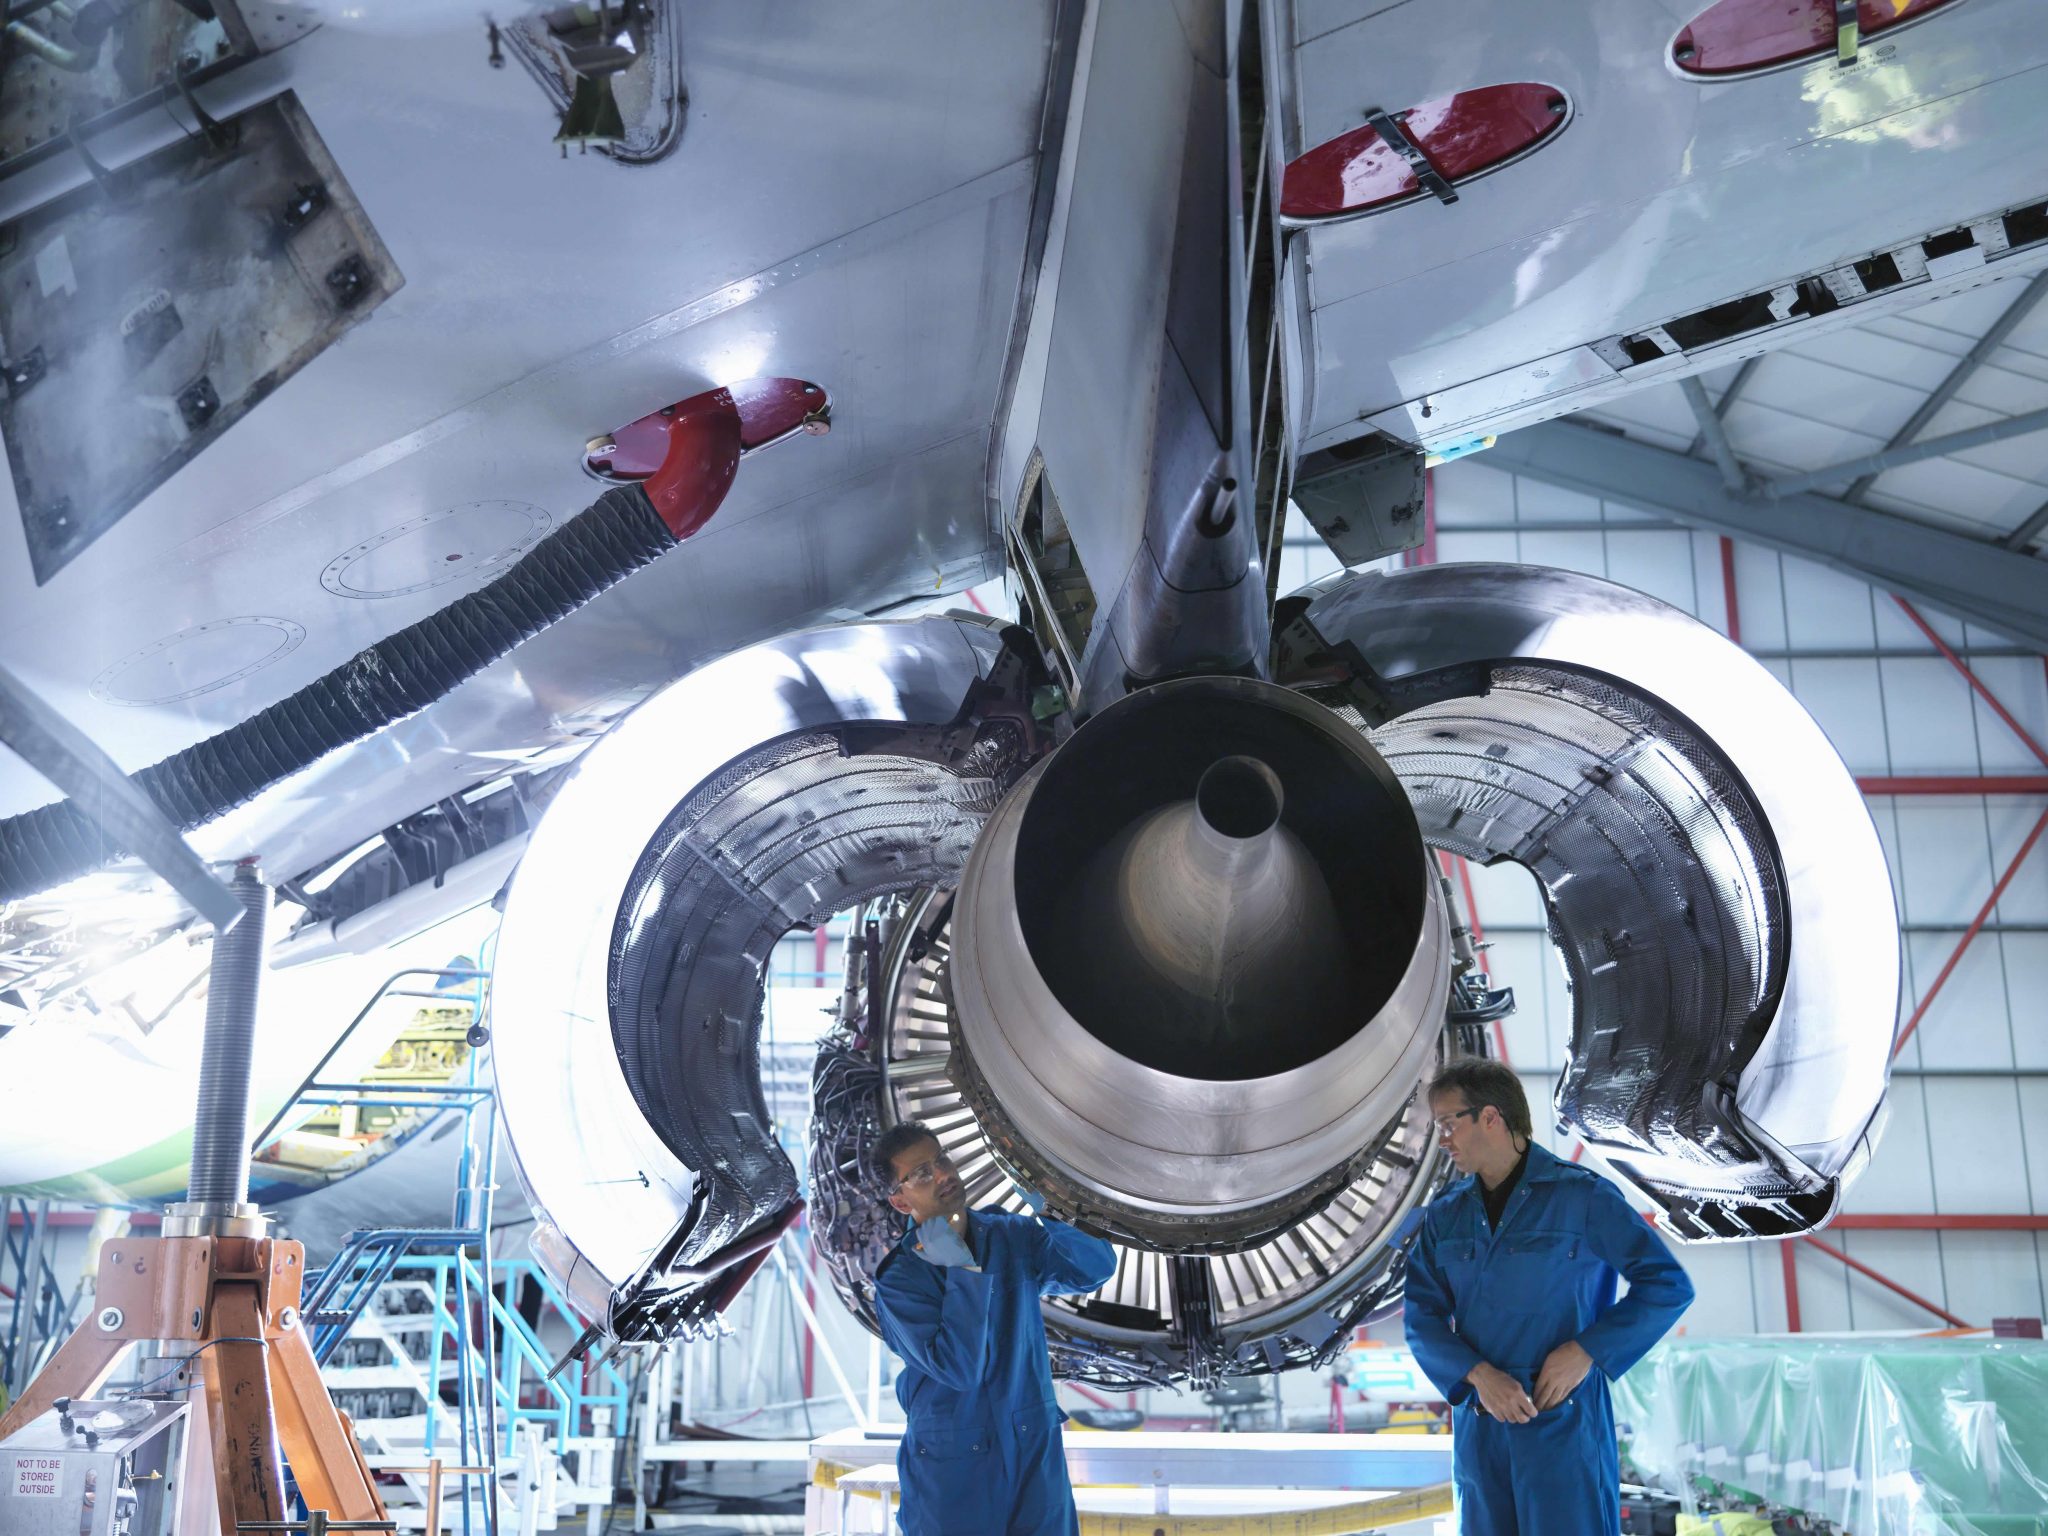 Nearshoring, an opportunity for the aerospace industry